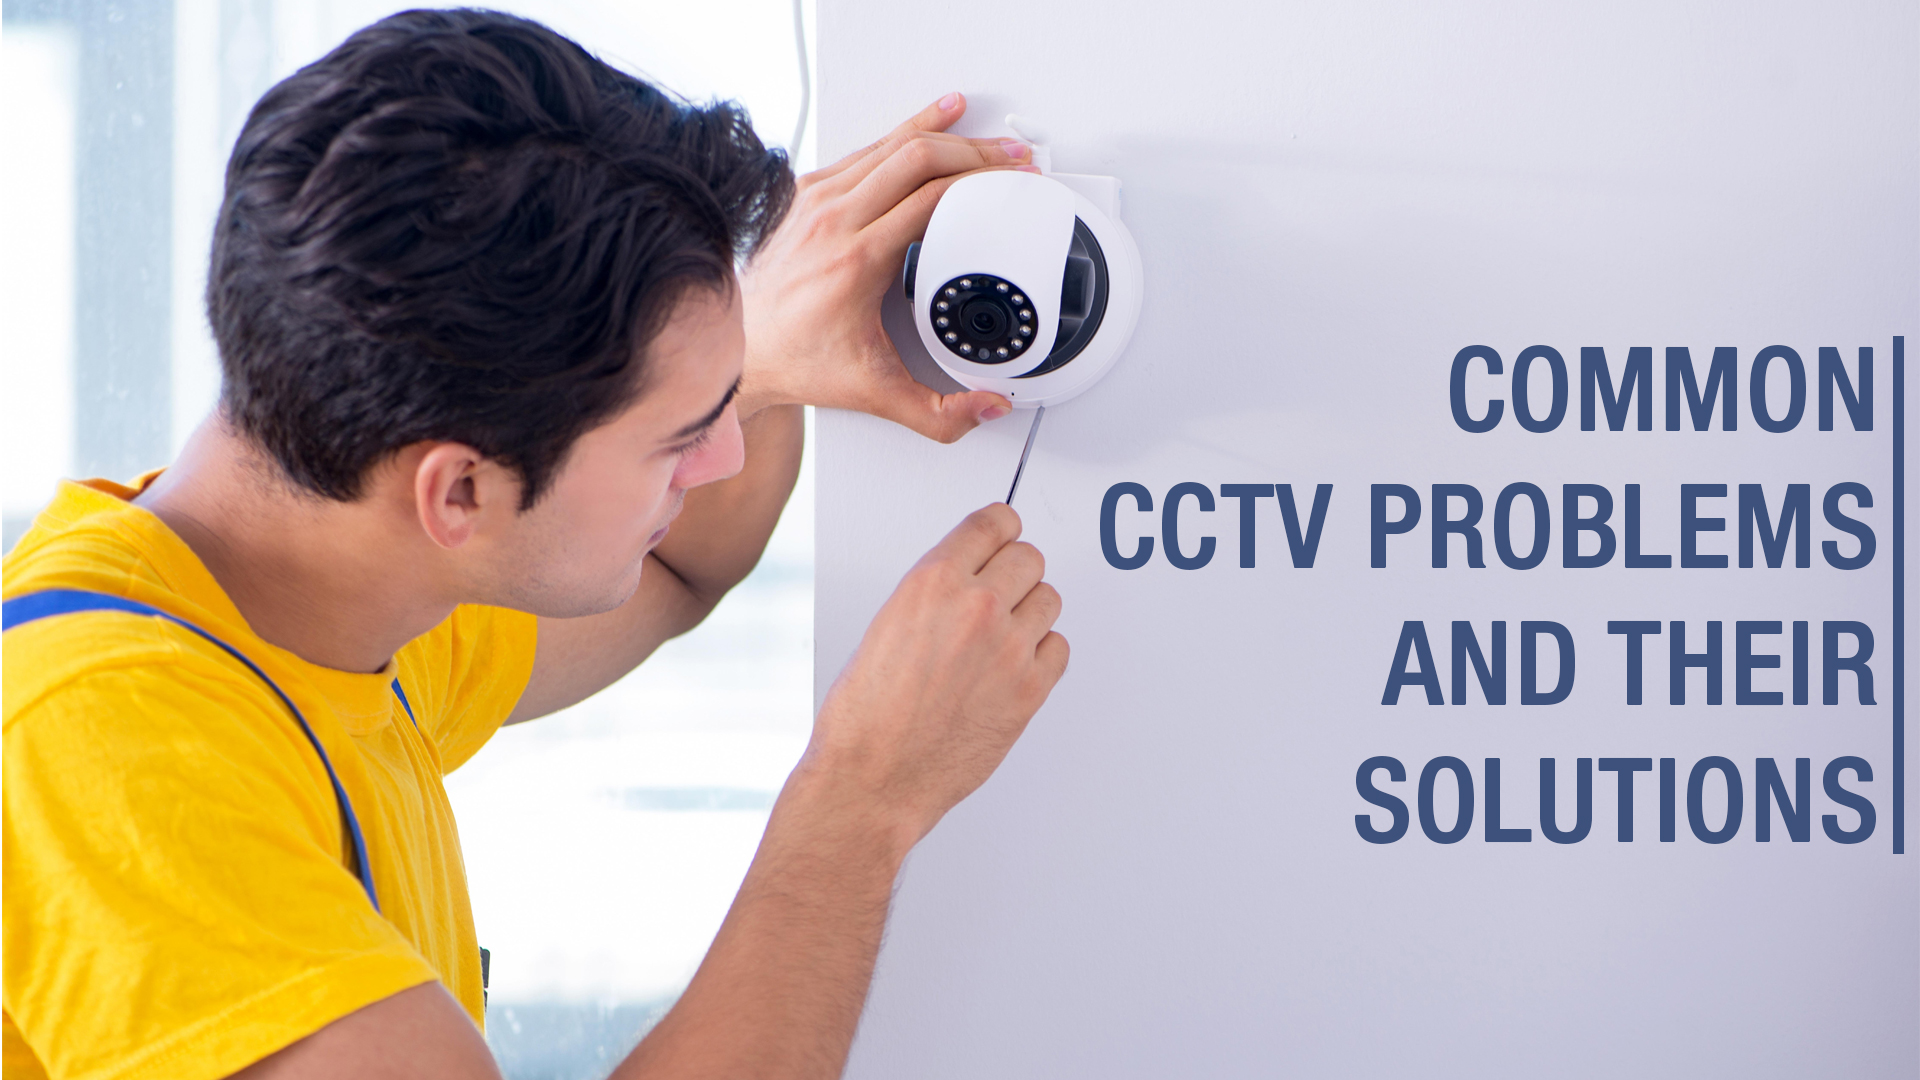 Common CCTV problems and their solutions